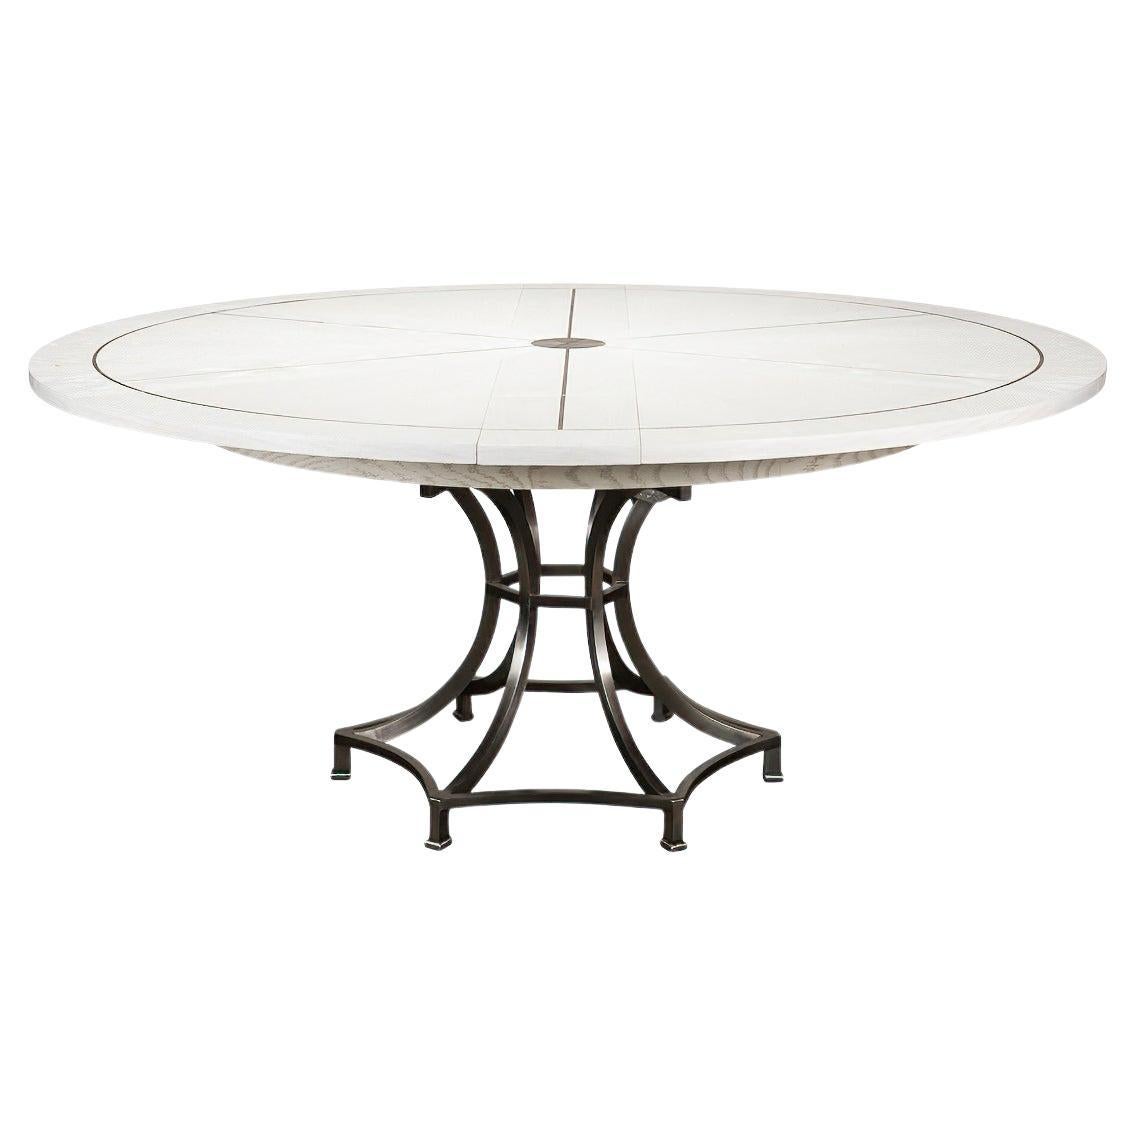 Modern Industrial Round Dining Table, White Oak